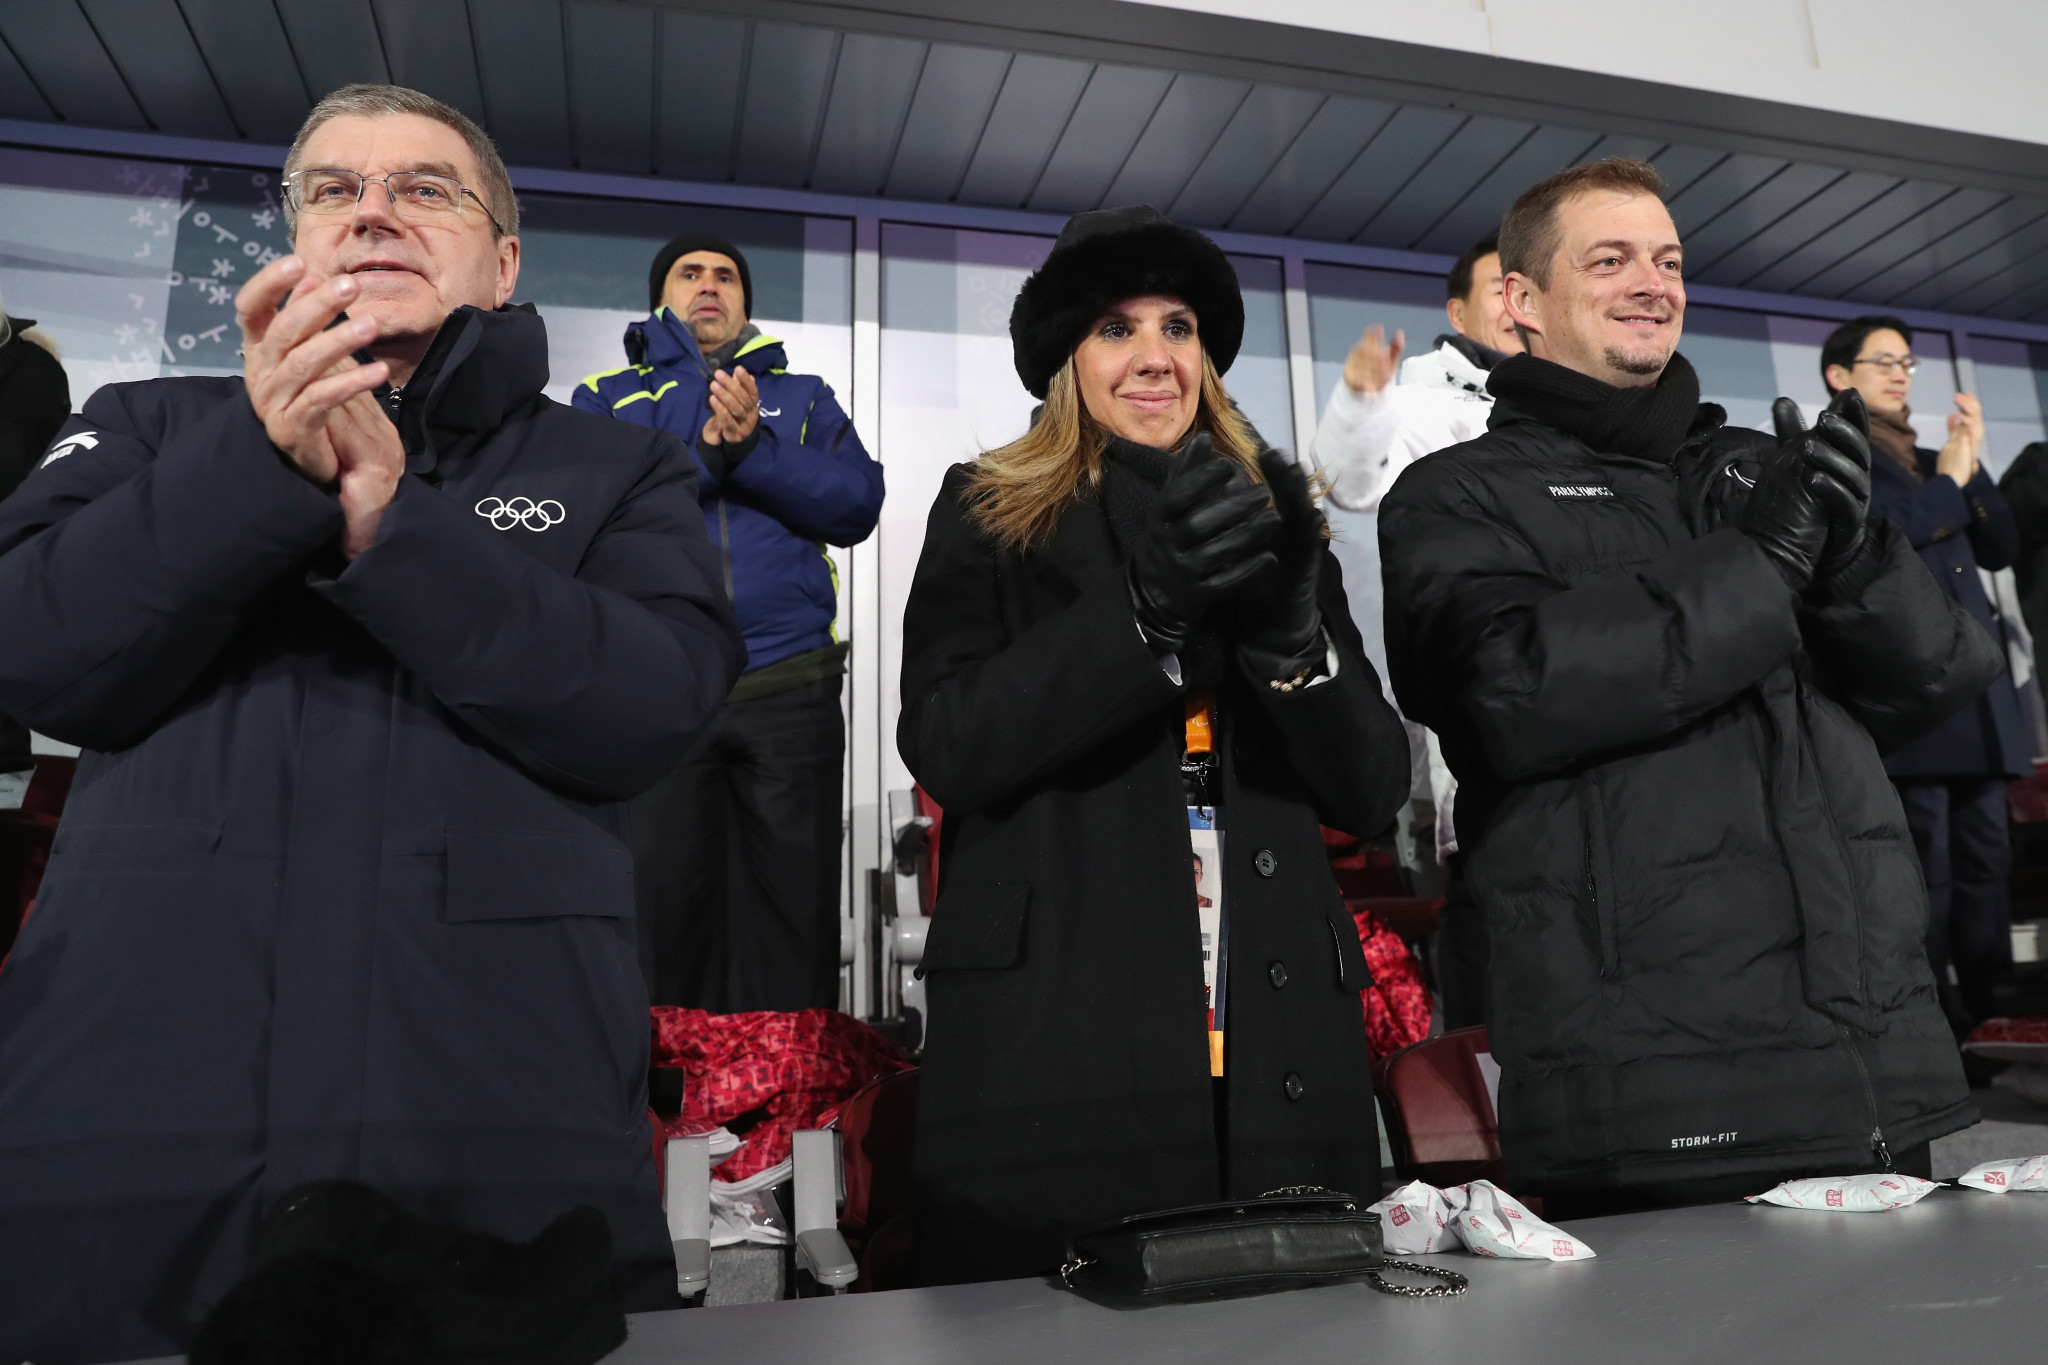 IOC President Thomas Bach pictured with Marcela and Andrew Parsons ©Getty Images